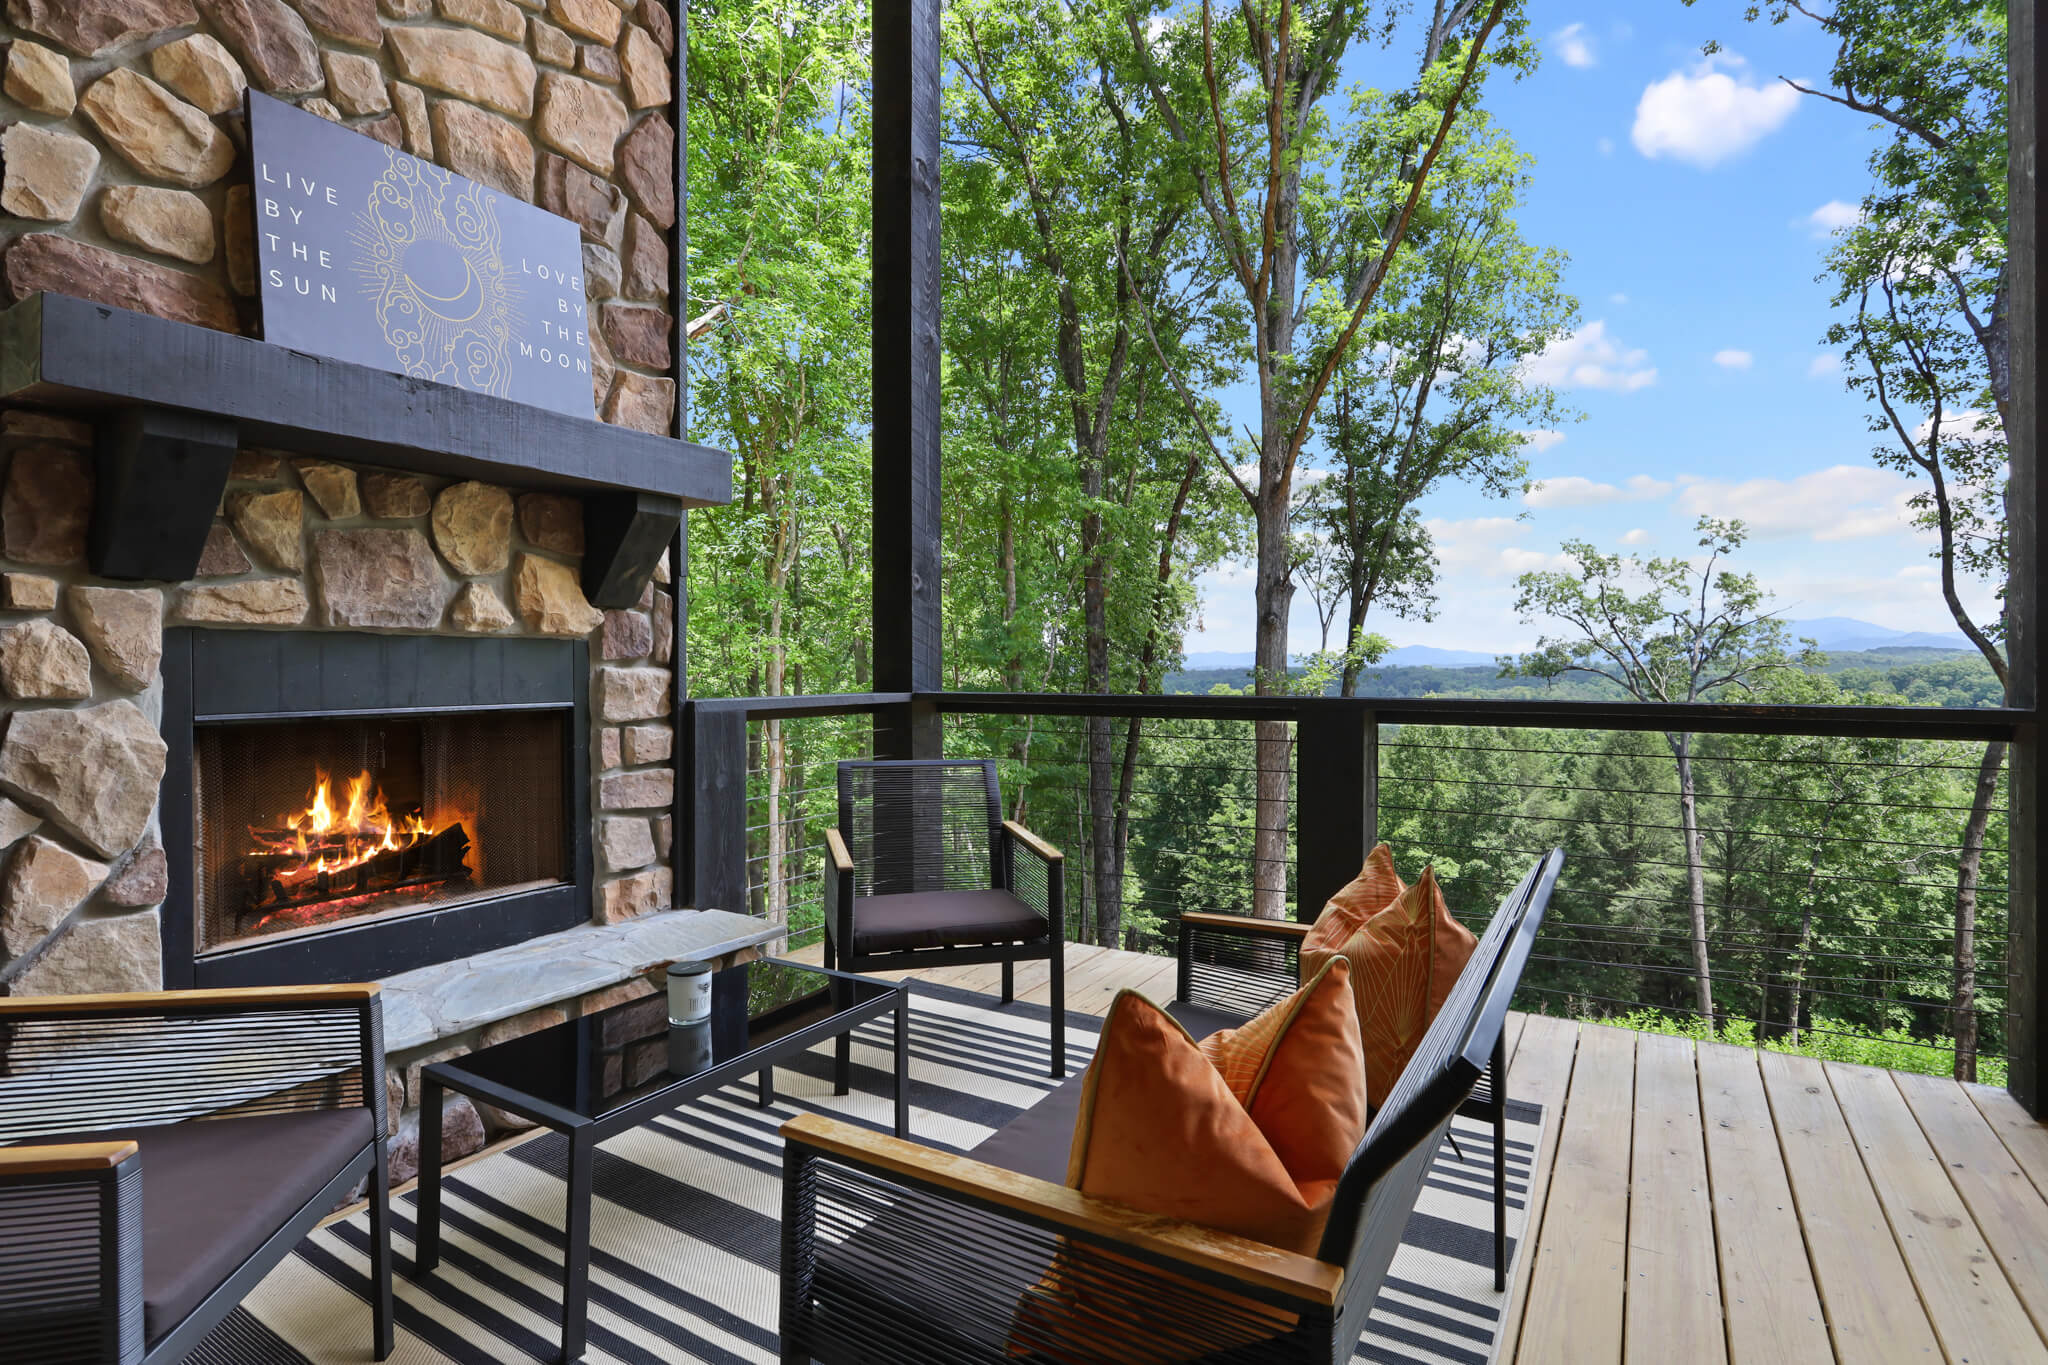 Best Blue Ridge Properties: Find the Best Cabins and Homes for Your Blue Ridge Vacation